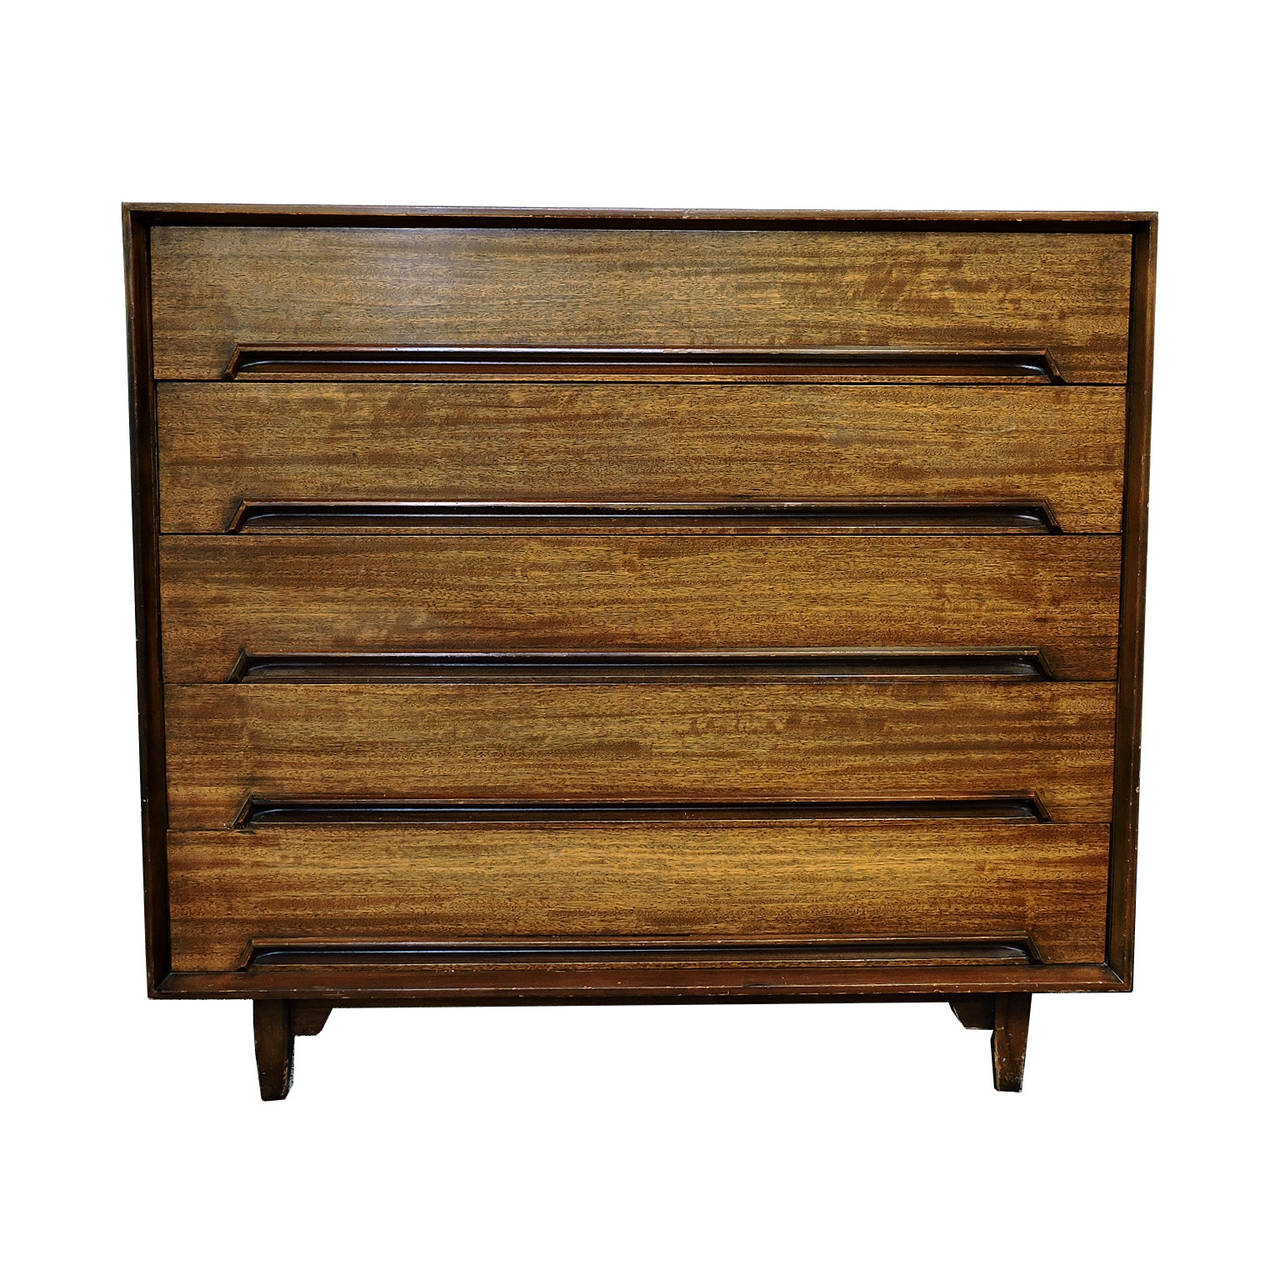 A pair of Mid-Century Modern mahogany and rosewood dressers designed by Milo Baughman for Drexel Perspective.
Dimensions: 38.5 x 42 x 19 inches.